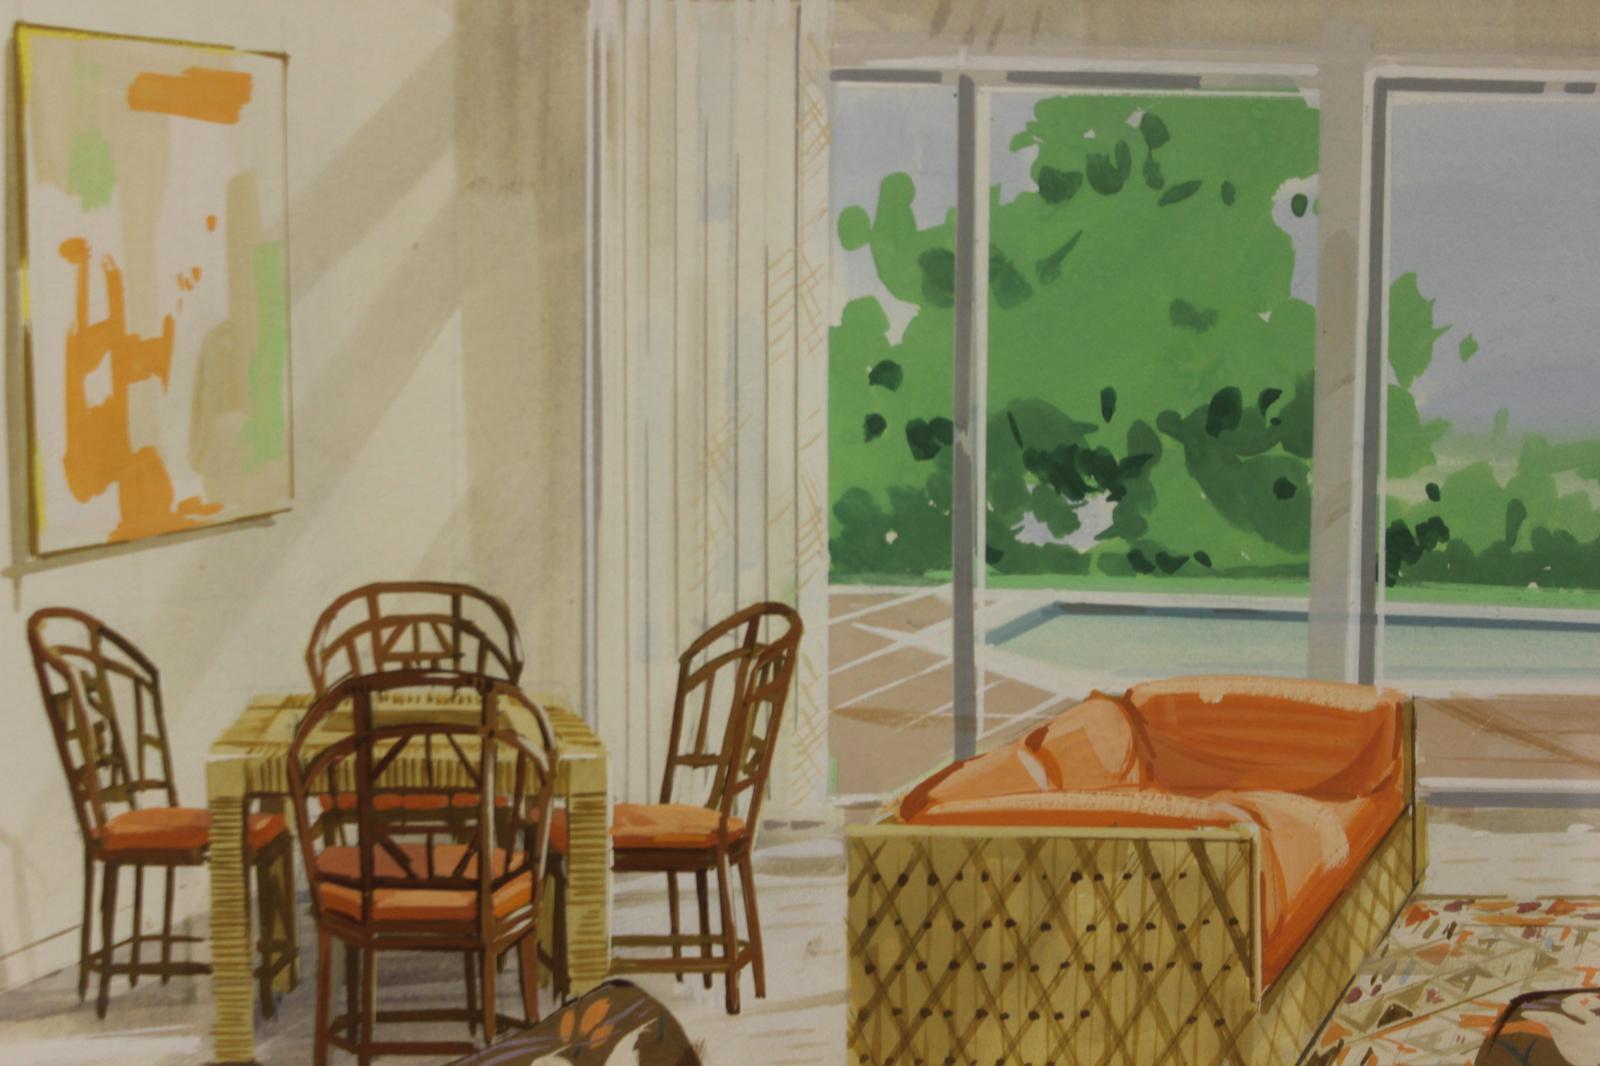 Retro c1960s tropical-inspired living room interior watercolor w/ an inviting pool beckoning just outside

Art Sz: 19 5/8